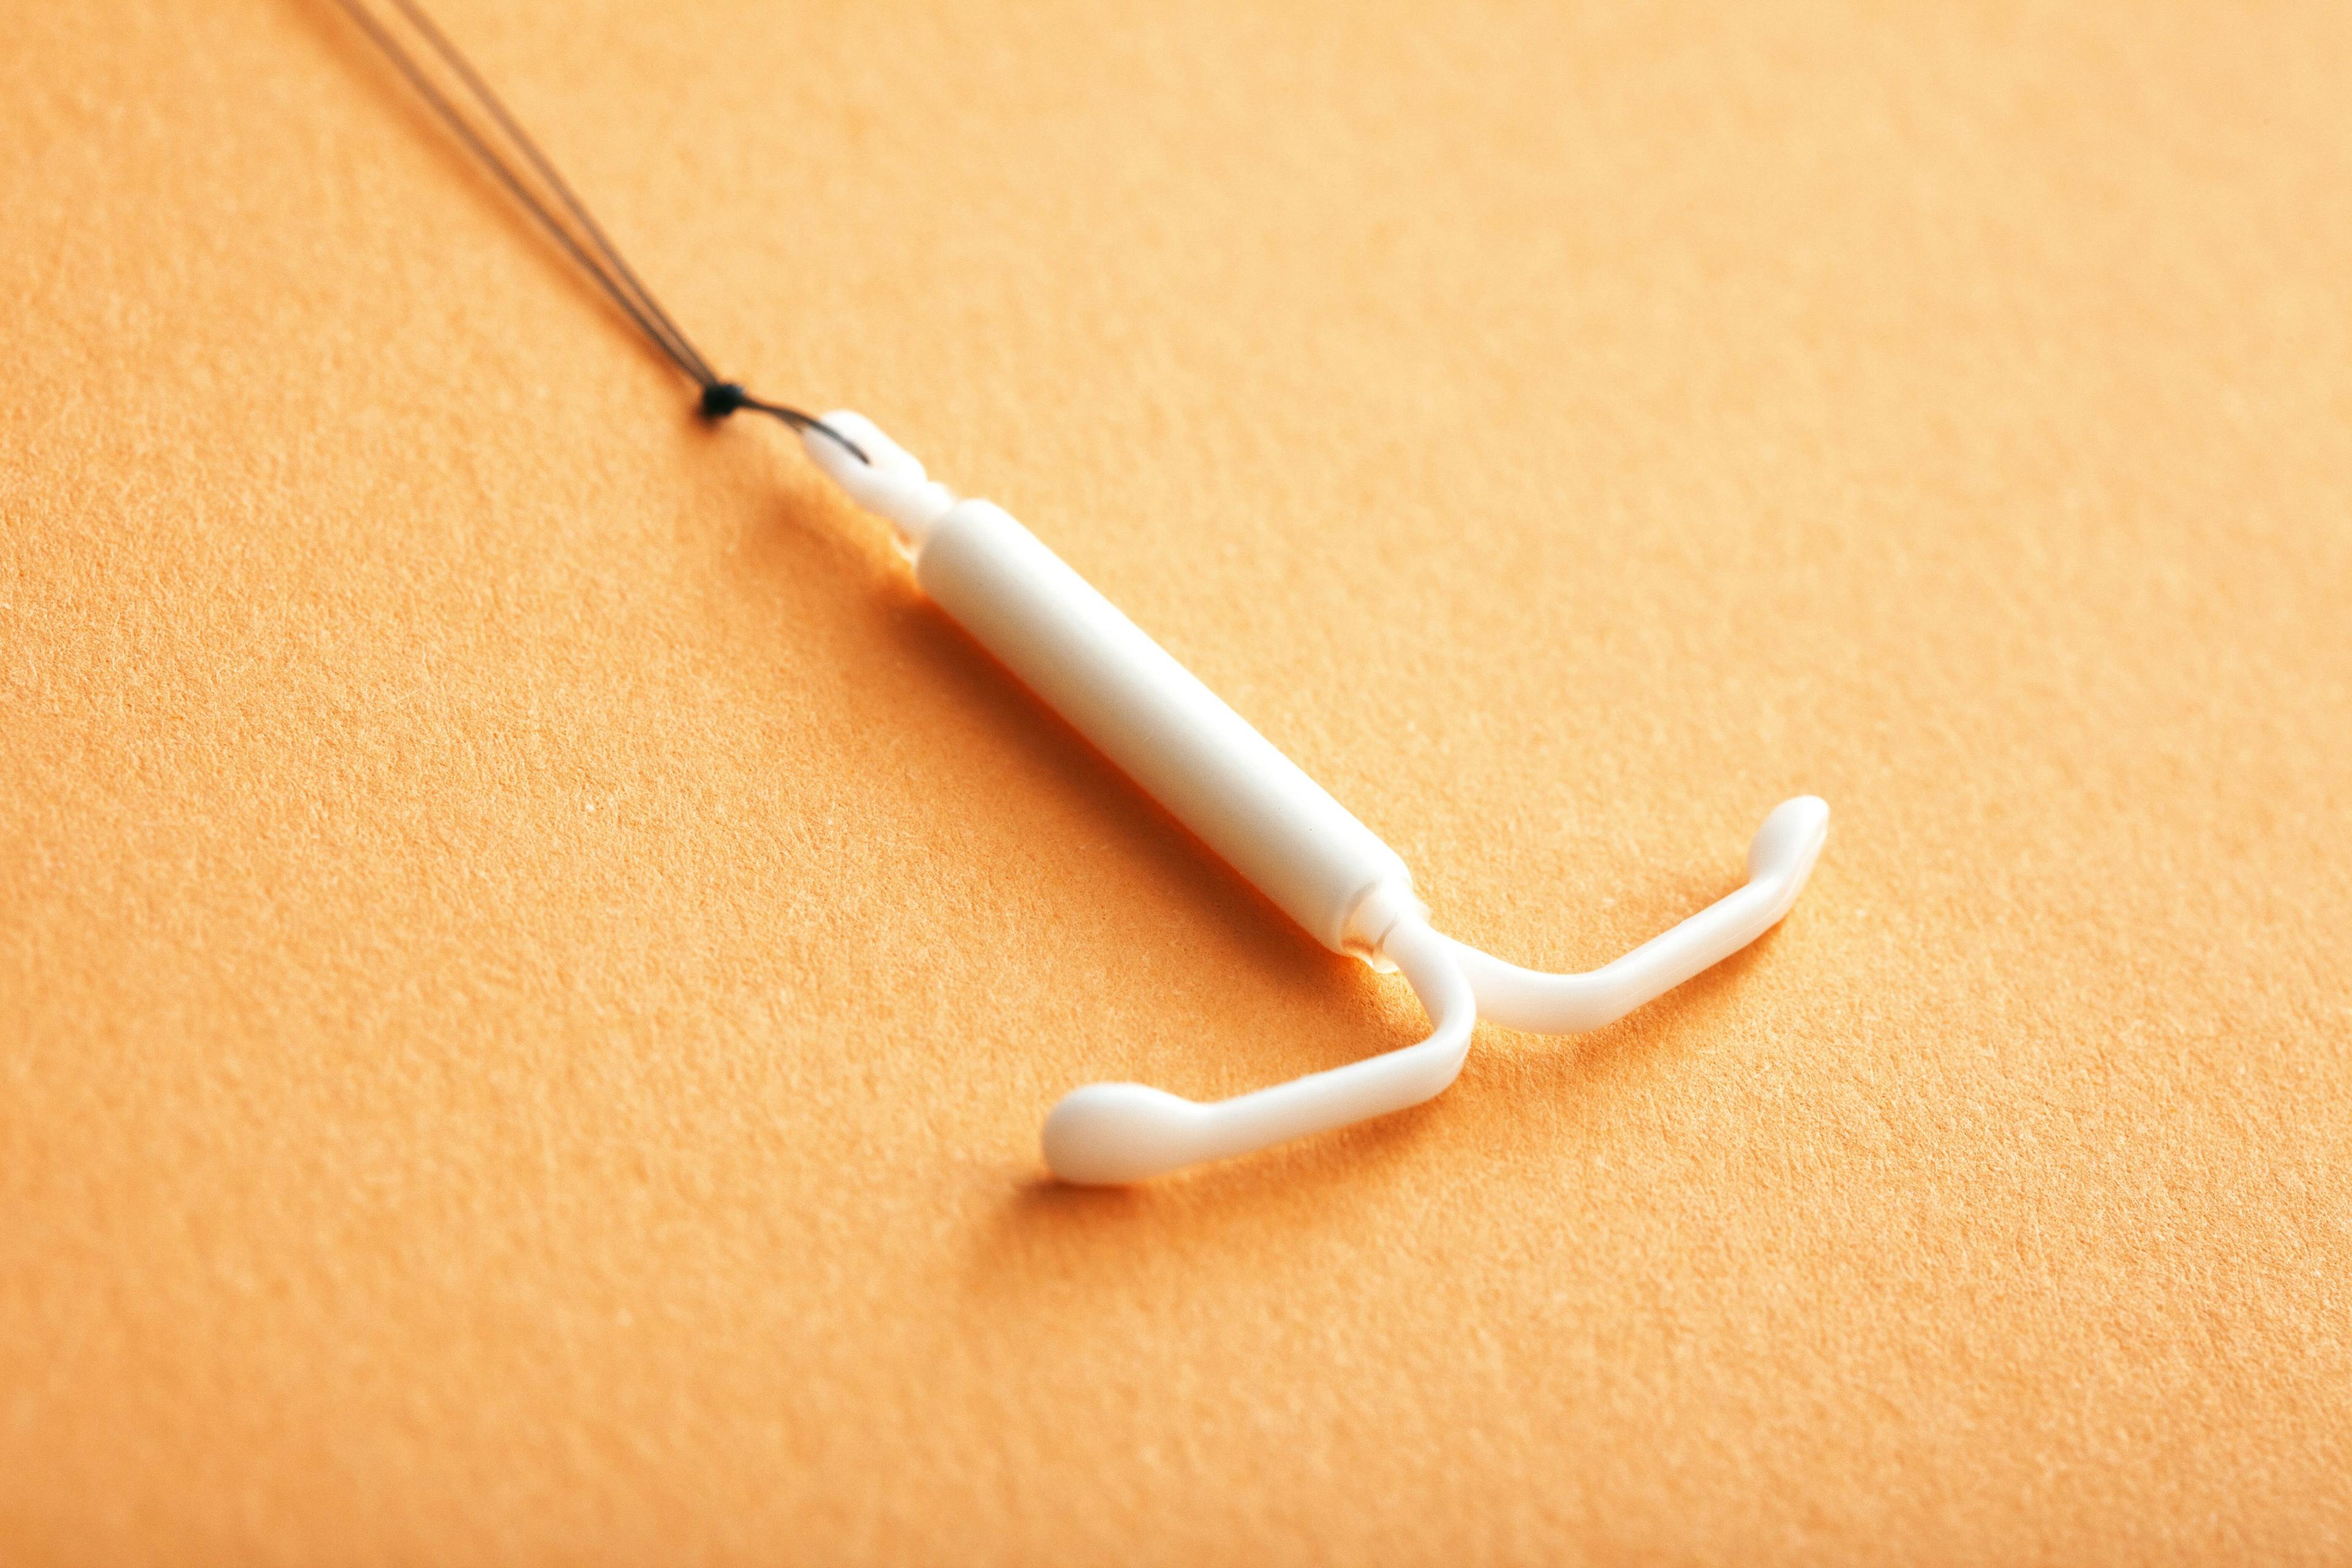 Oral and IUD emergency contraception provision